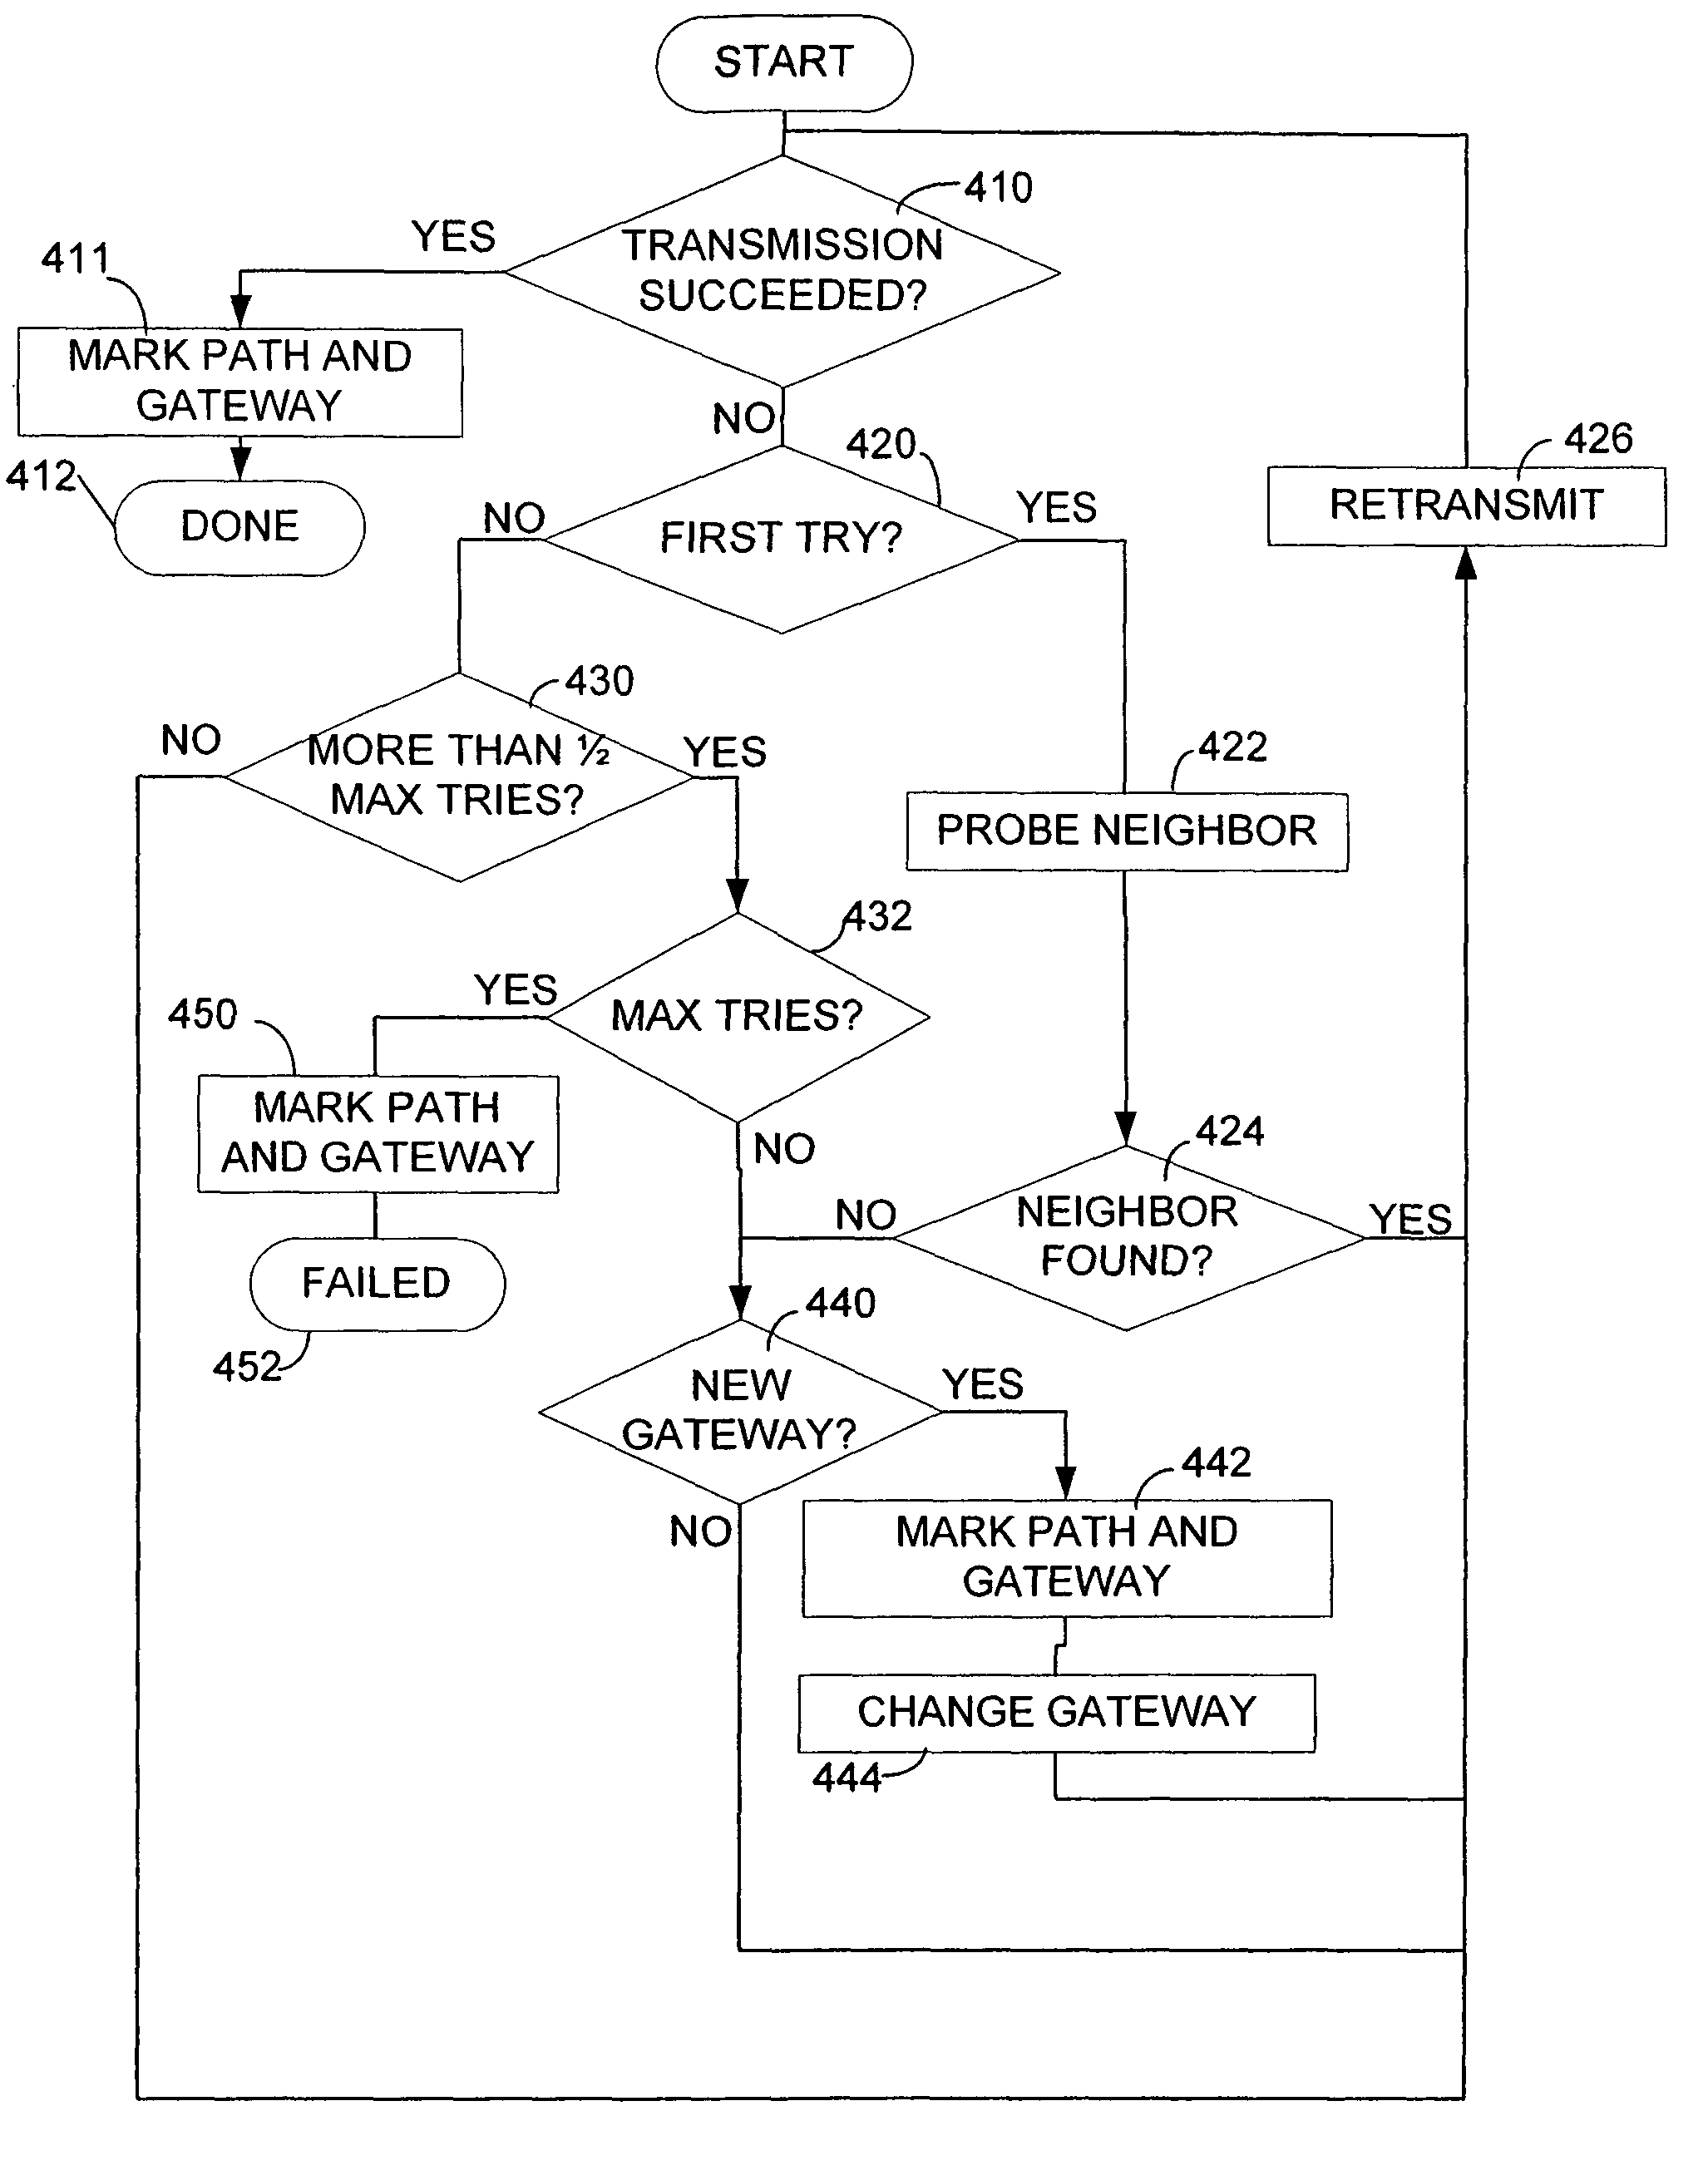 Networked computer with gateway selection